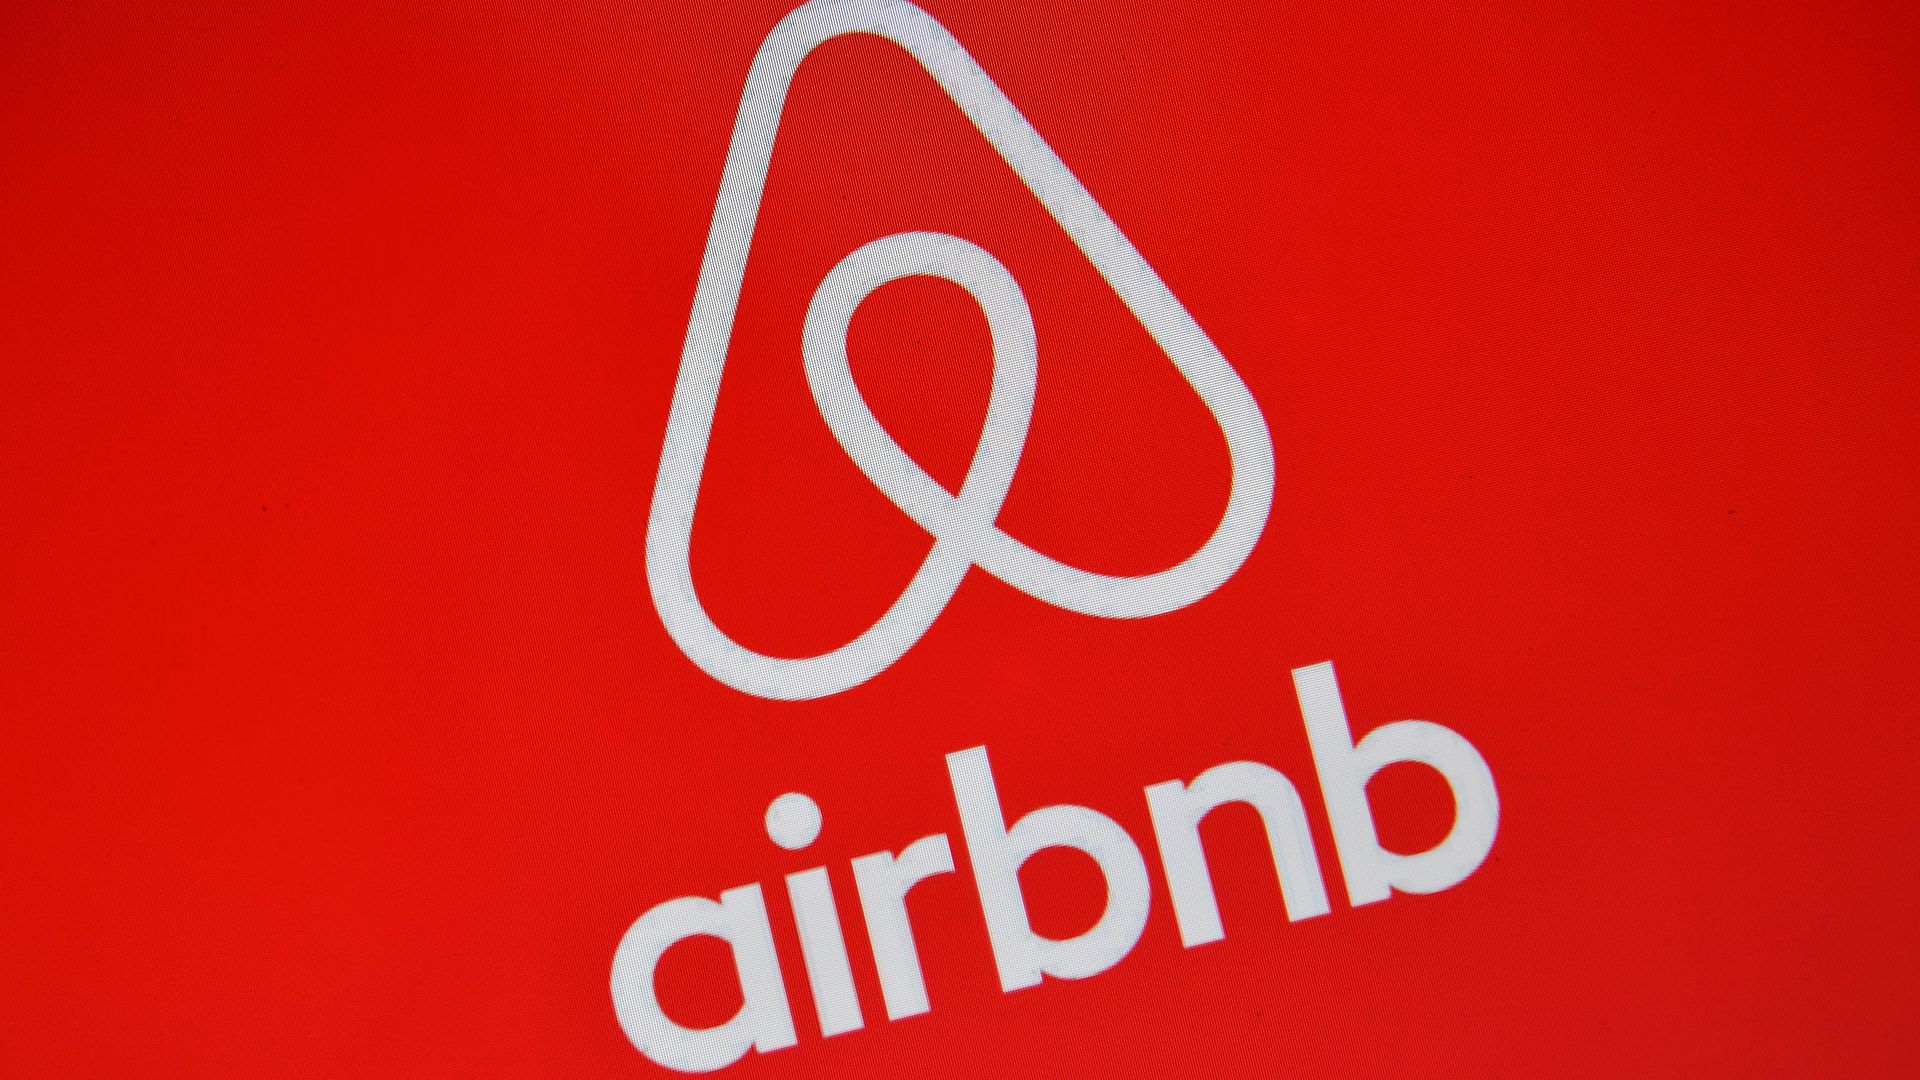 Airbnb logo on a red background